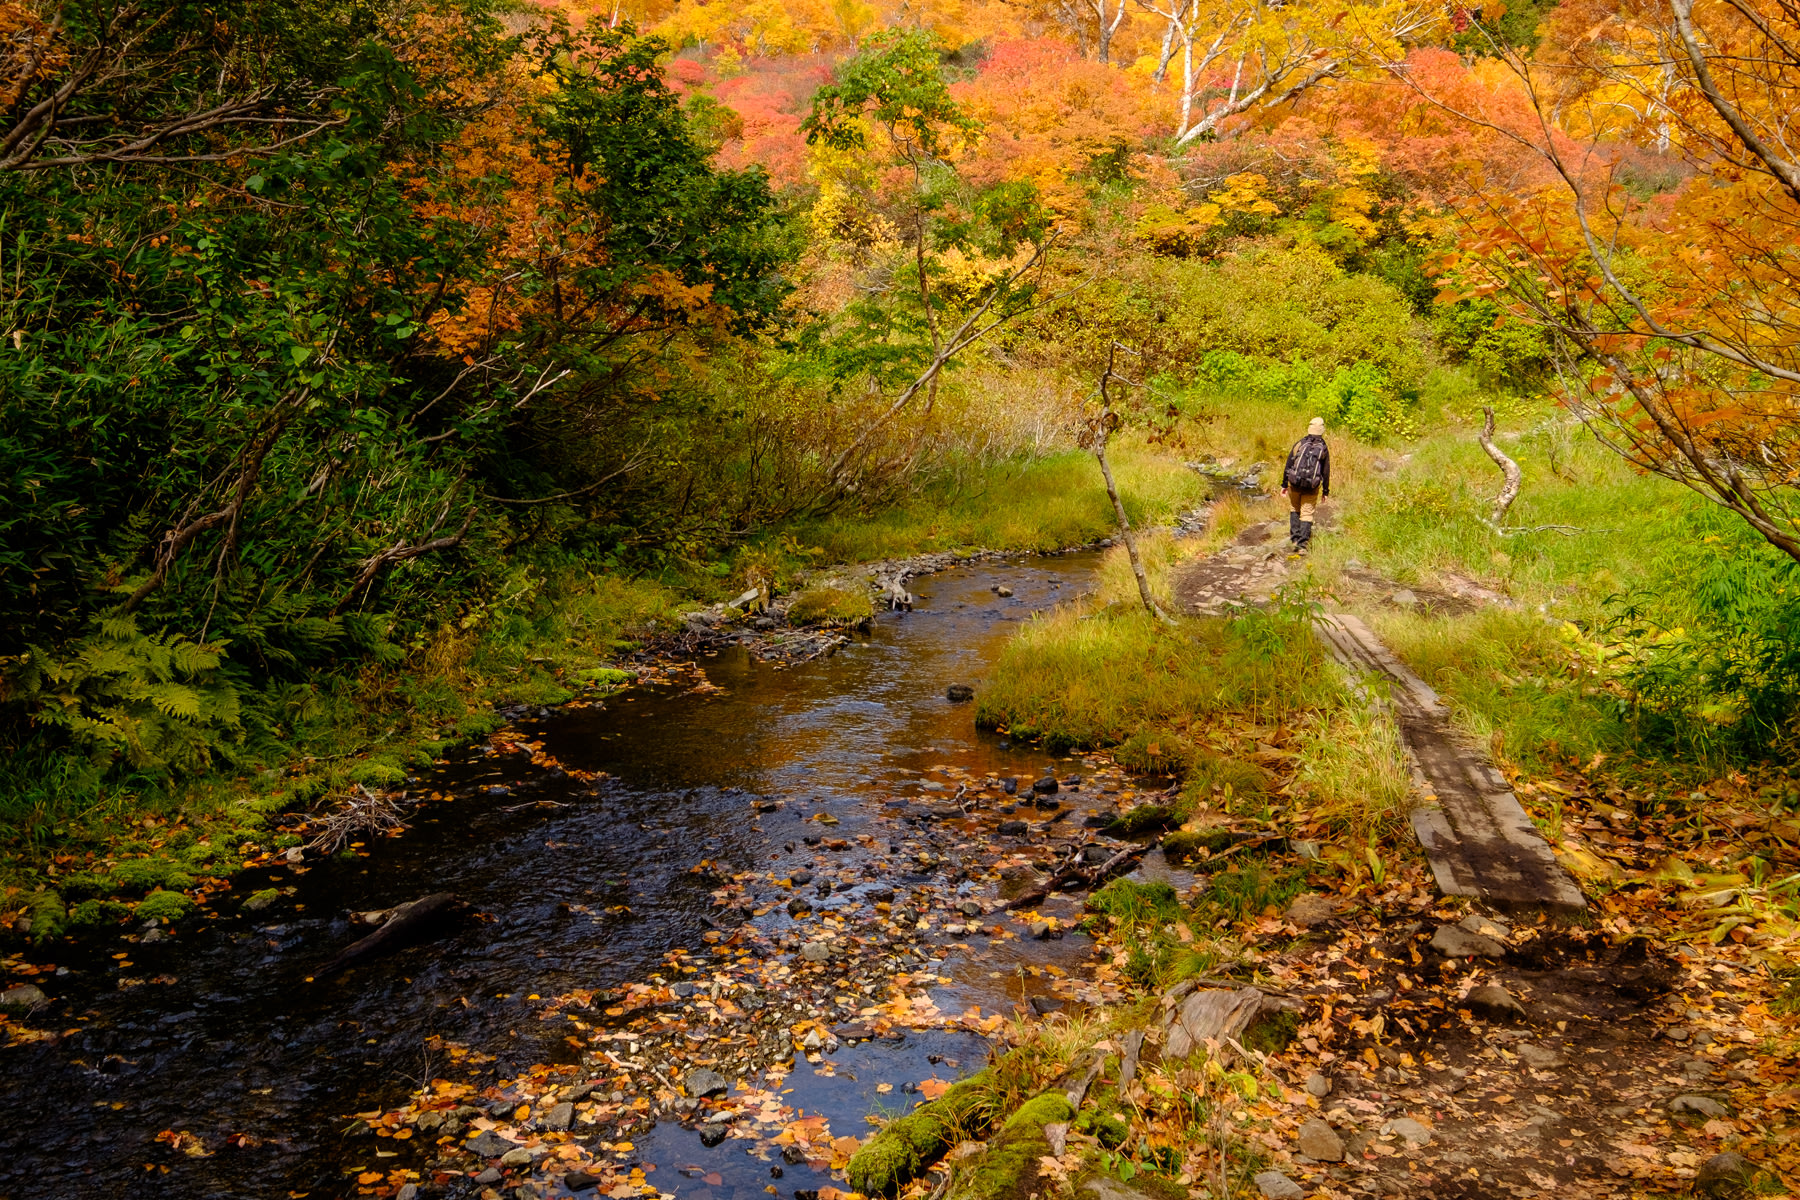 A hiker makes their way along a boardwalk alongside a river. The autumn leaves are at their peak.